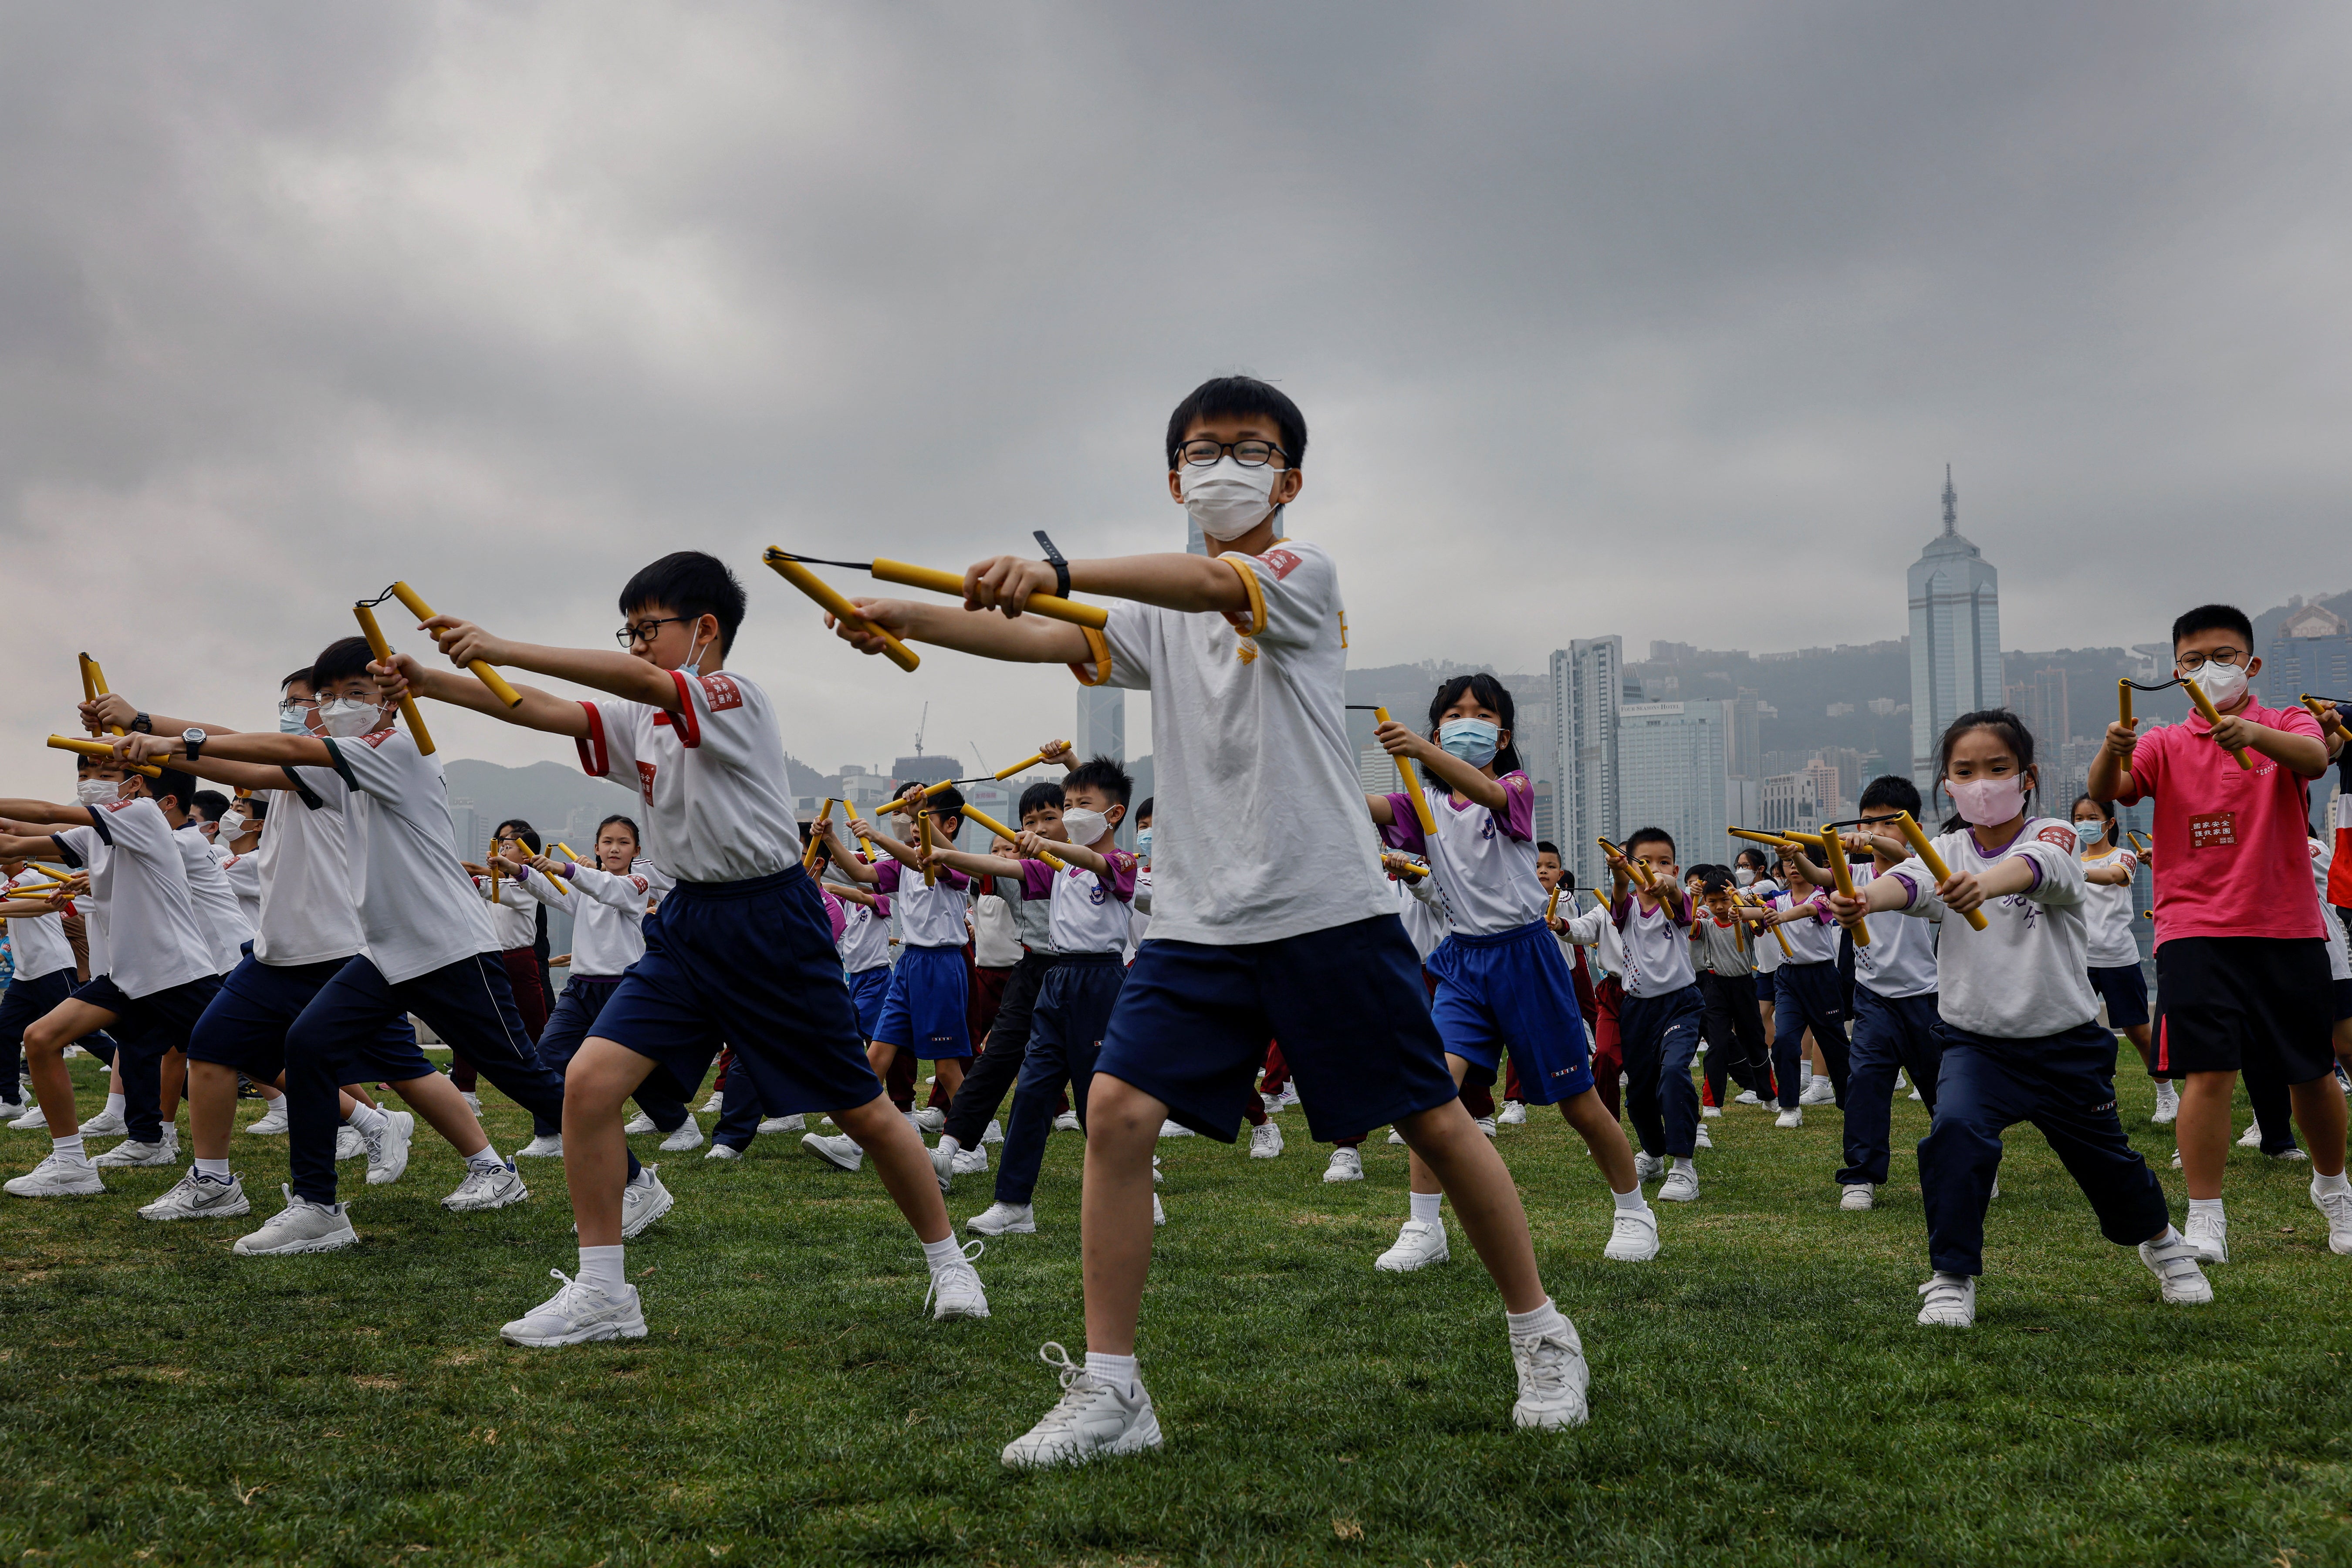 Heung Yee Kuk Yuen Long district secondary school students attend a nunchaku performance event by the sea, in a tribute to Bruce Lee in Hong Kong